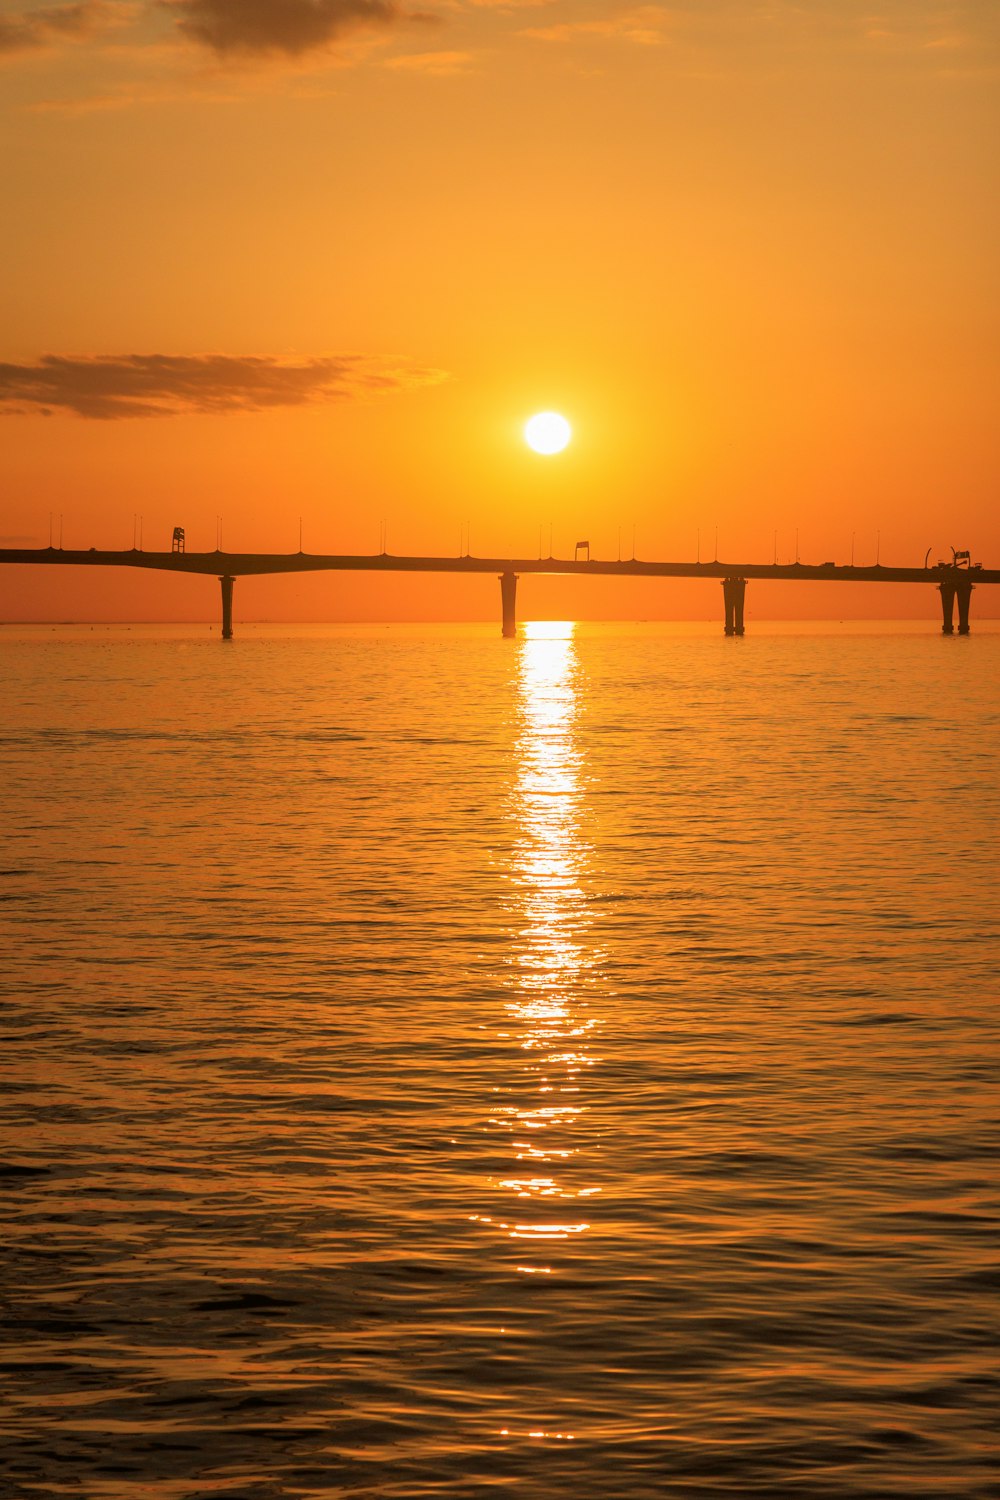 the sun is setting over the water with a bridge in the background